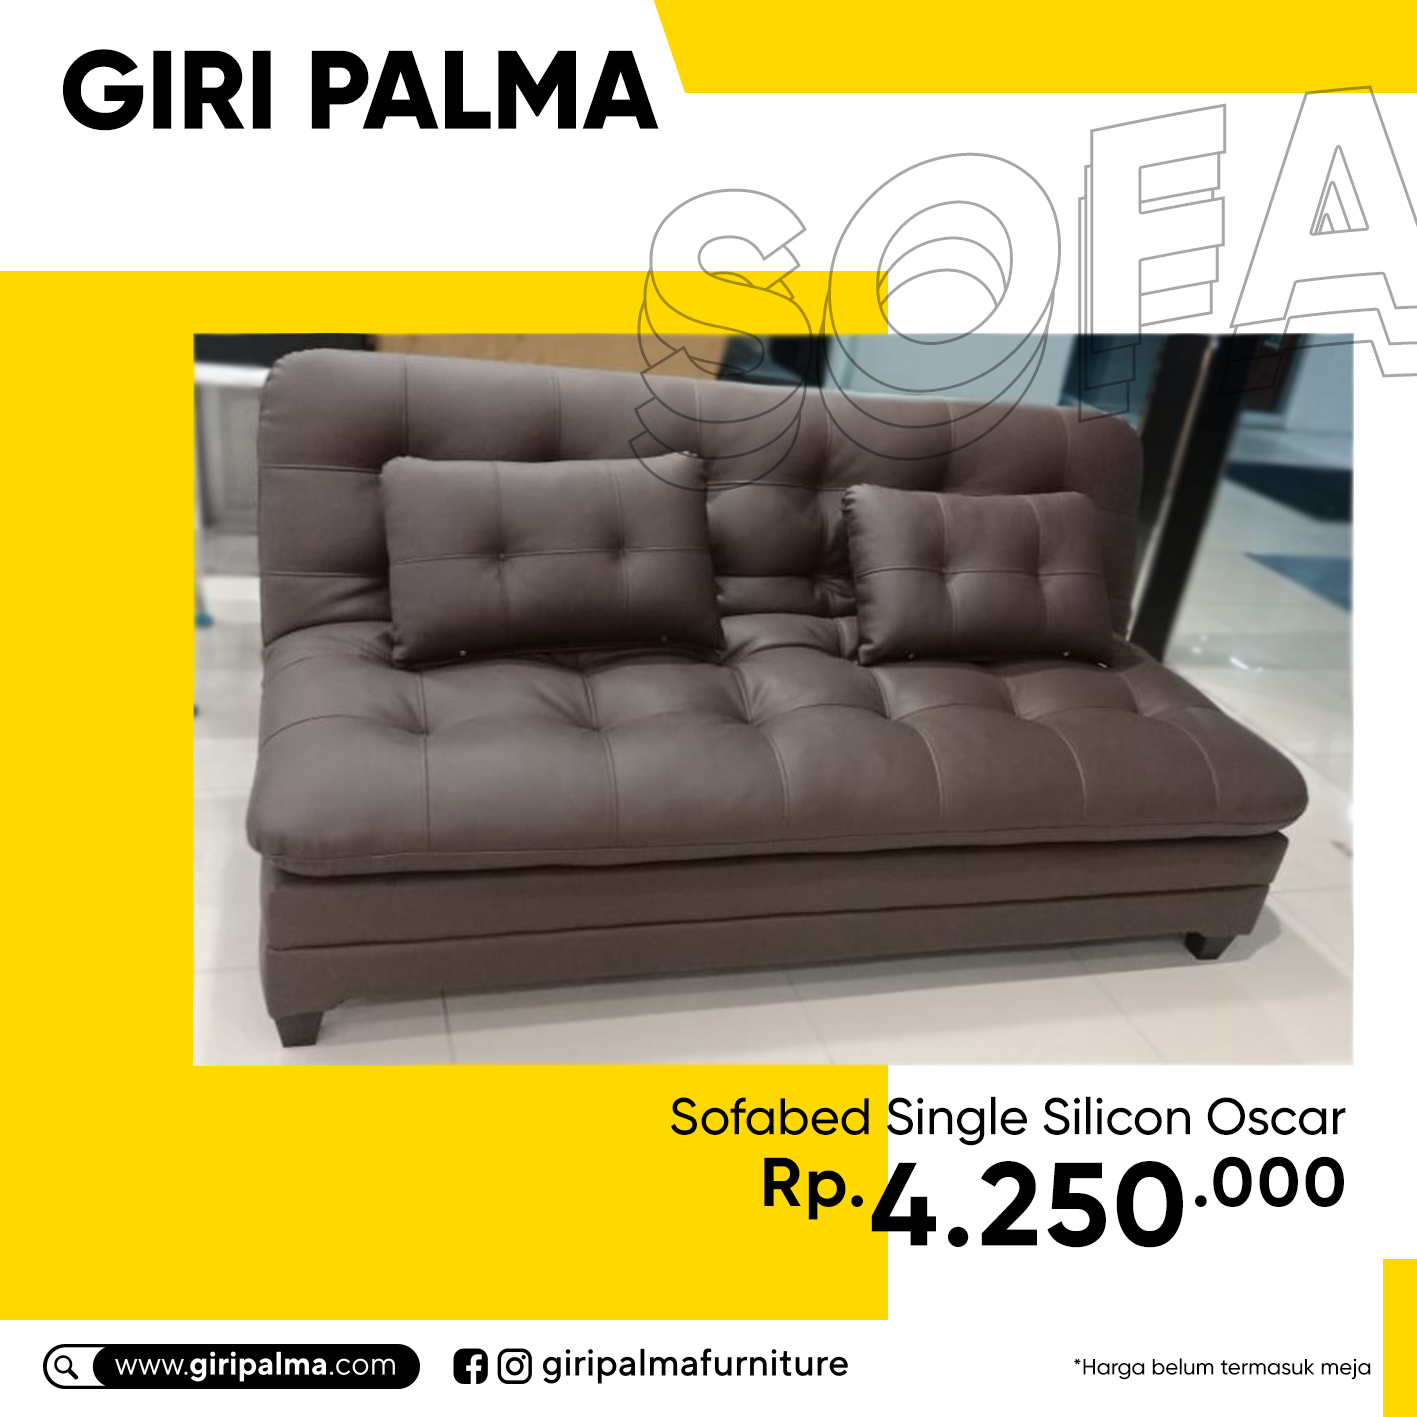 Sofabed Single Silicon Osc Malang